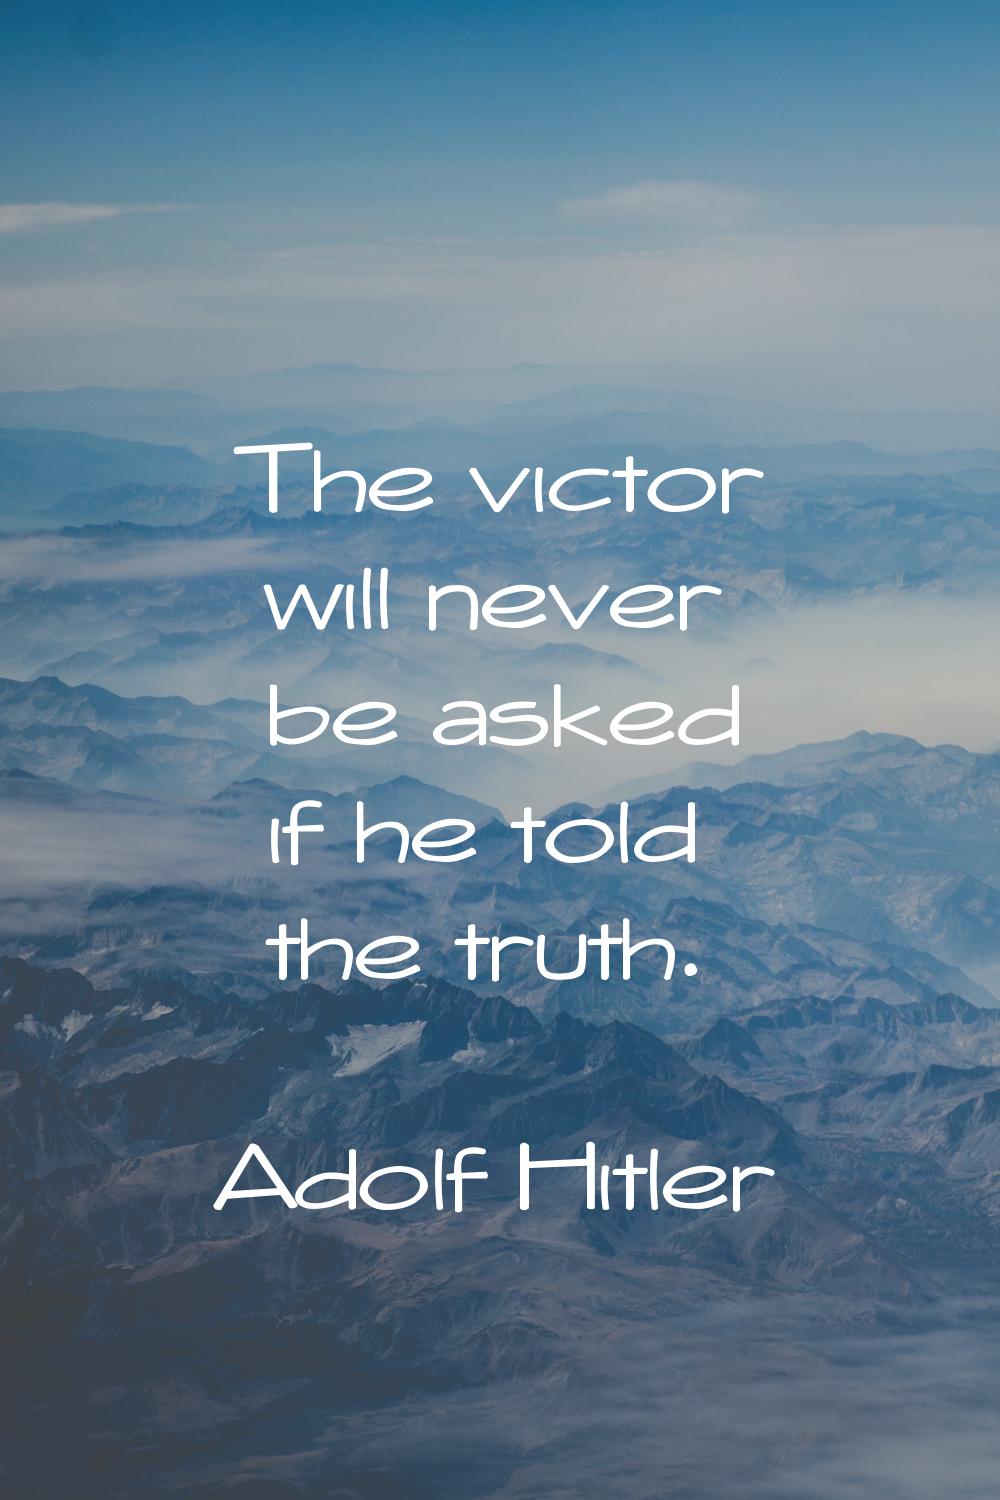 The victor will never be asked if he told the truth.